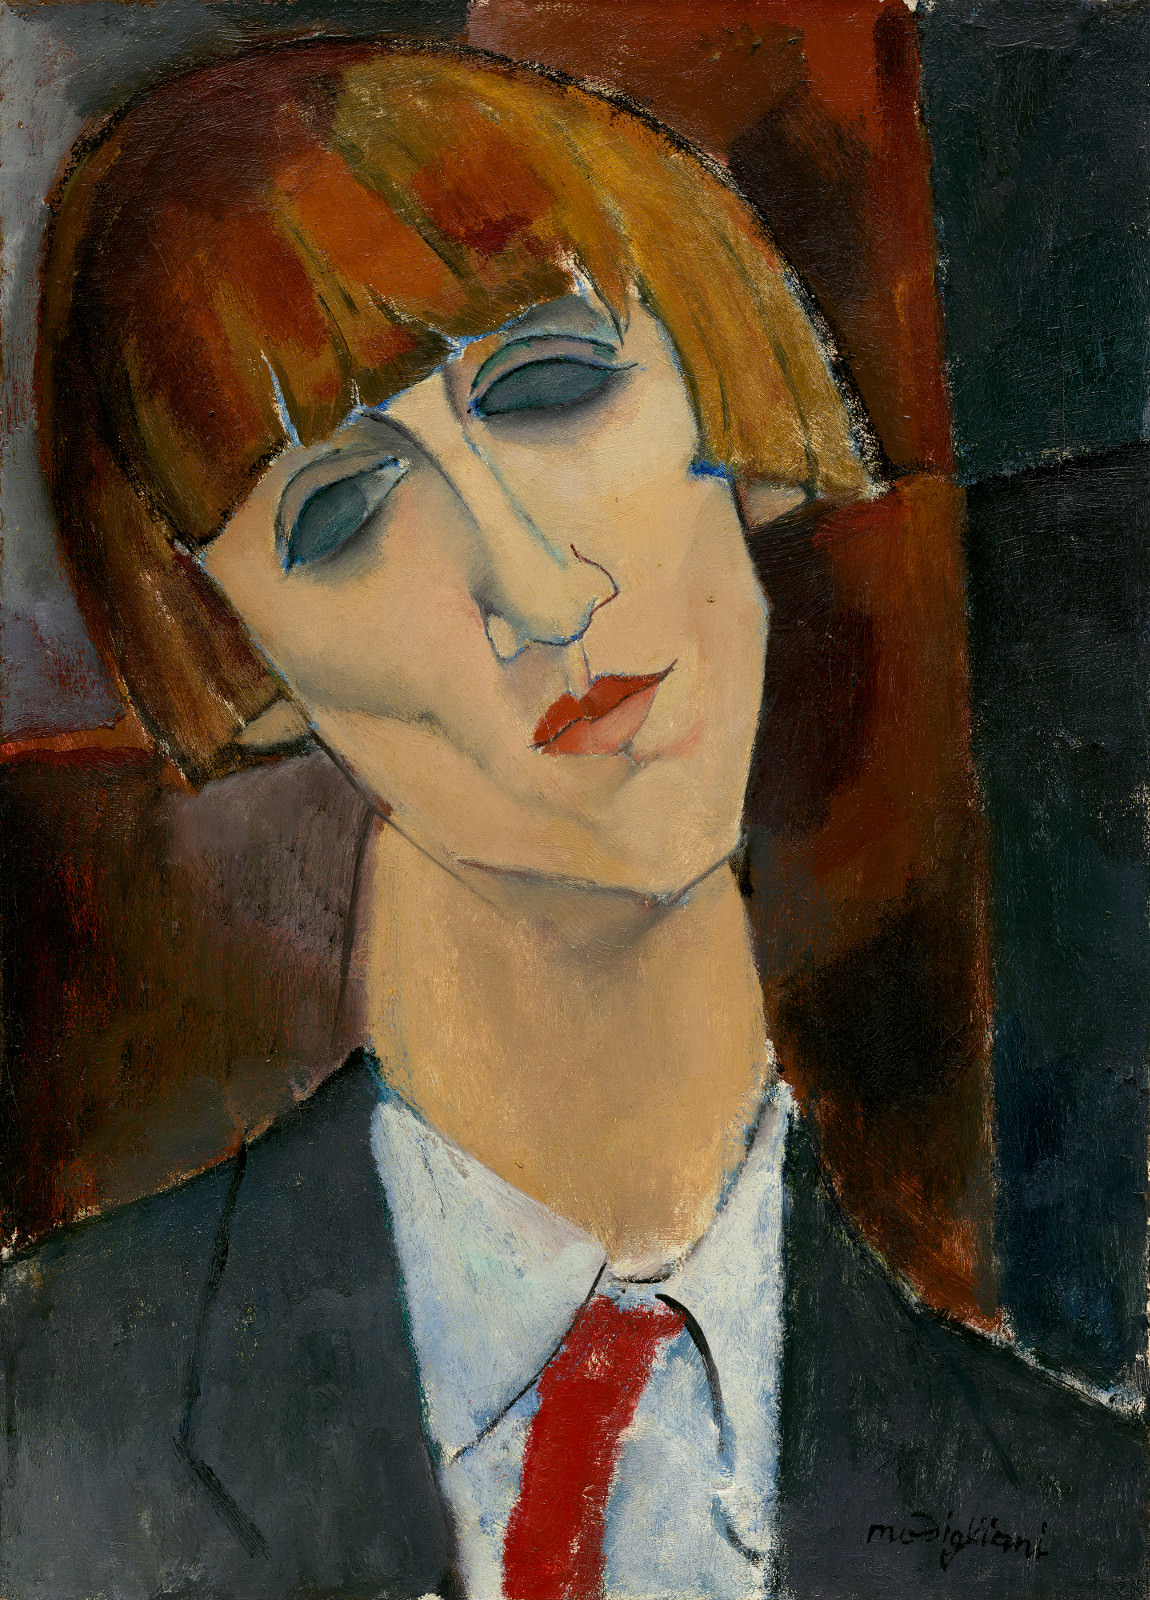 Figue. 7 - Madamme Kisling, Amedeo Modigliani, 1917, huile sur toile, 46,2 x 33,2 cm. National Gallery of Art, Washington. Chester Dale Collection.